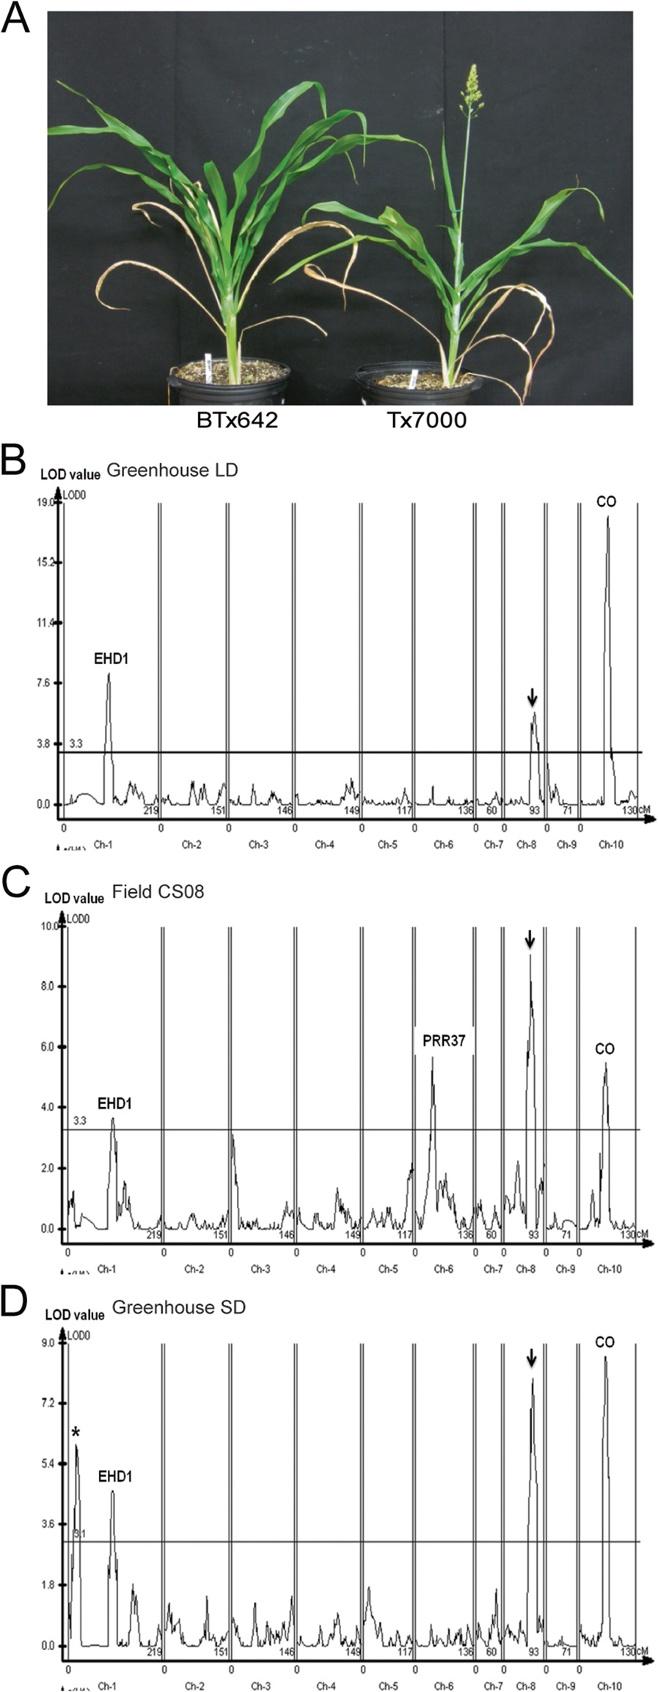 Yang et al. BMC Plant Biology 2014, 14:148 Page 3 of 15 Figure 1 Genetic basis of flowering time variation in the BTx642/Tx7000 RIL population. (A).